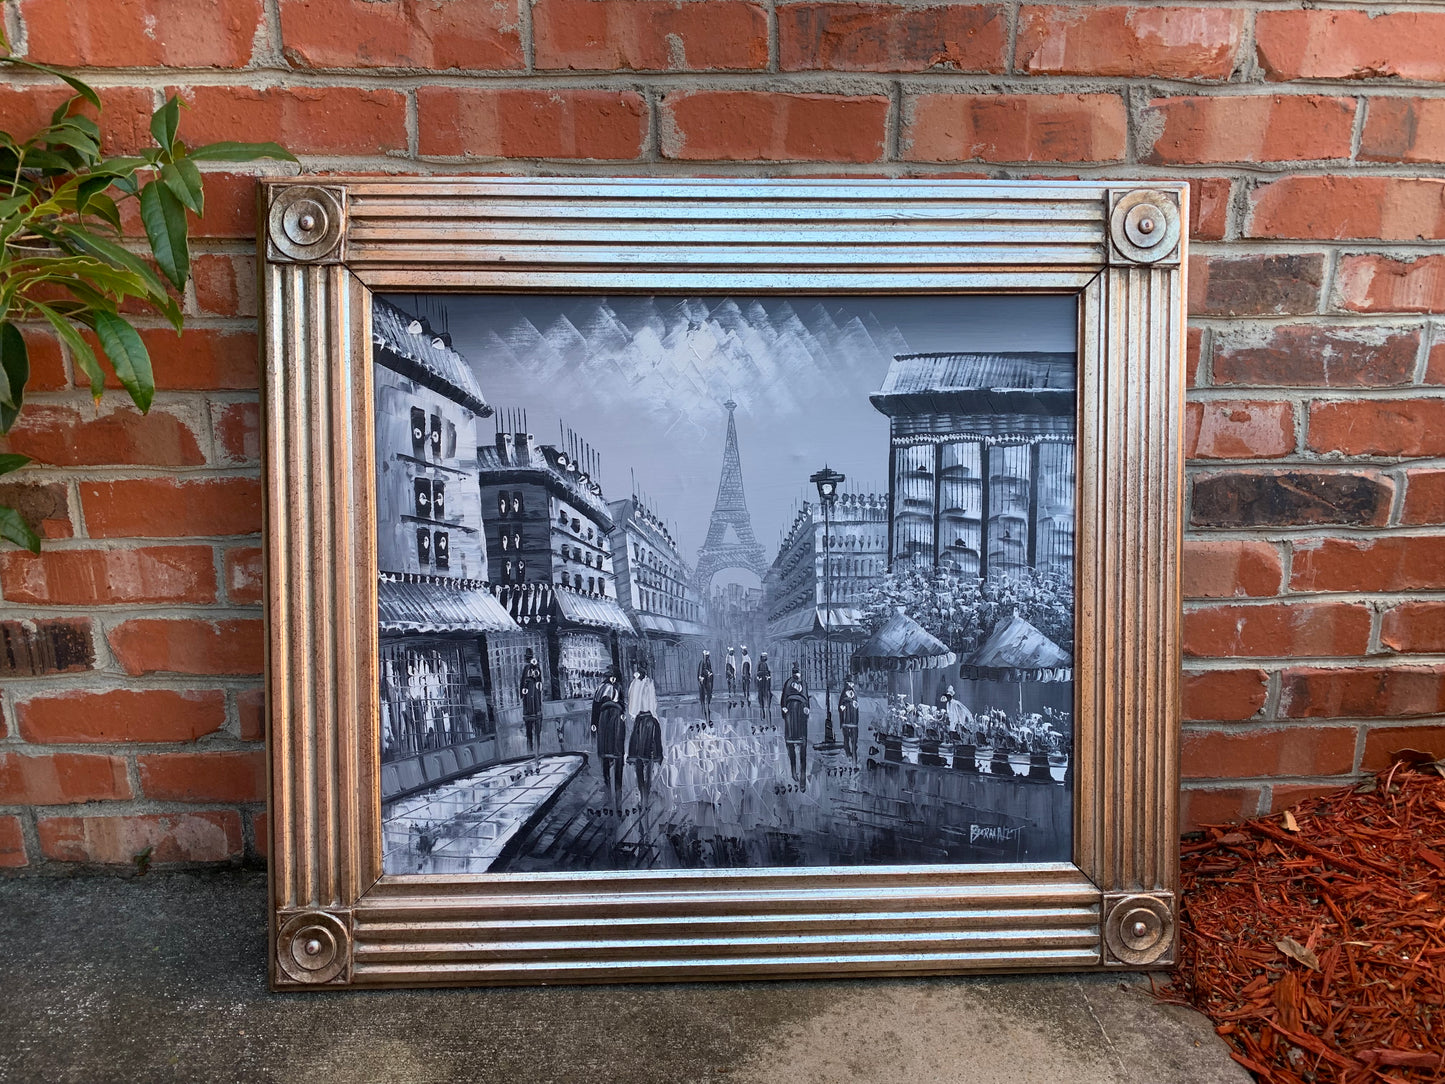 Stunning Original Painting of Paris signed and framed- Excellent condition!